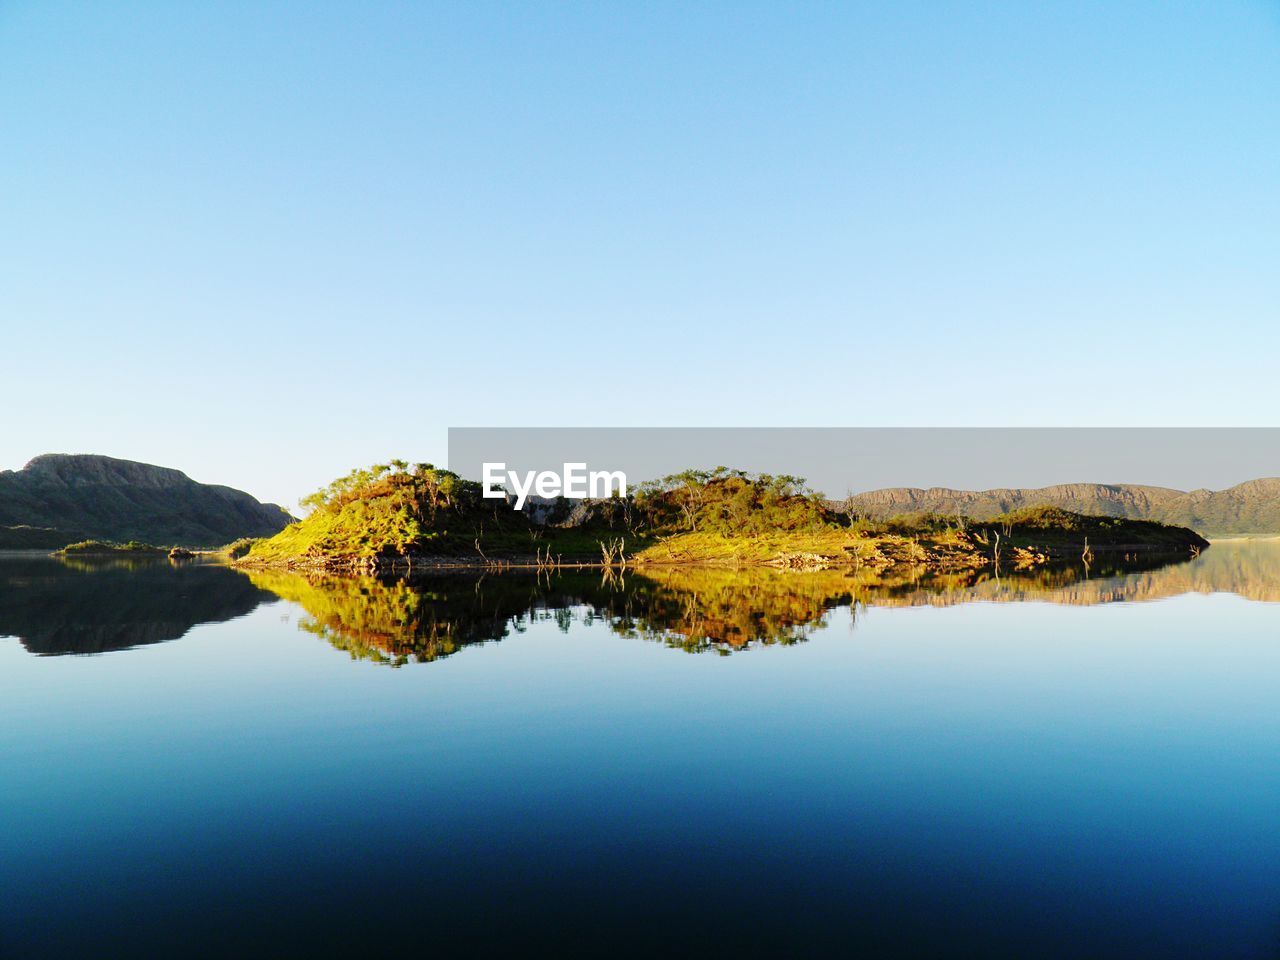 SCENIC VIEW OF LAKE AGAINST CLEAR BLUE SKY AND TREES